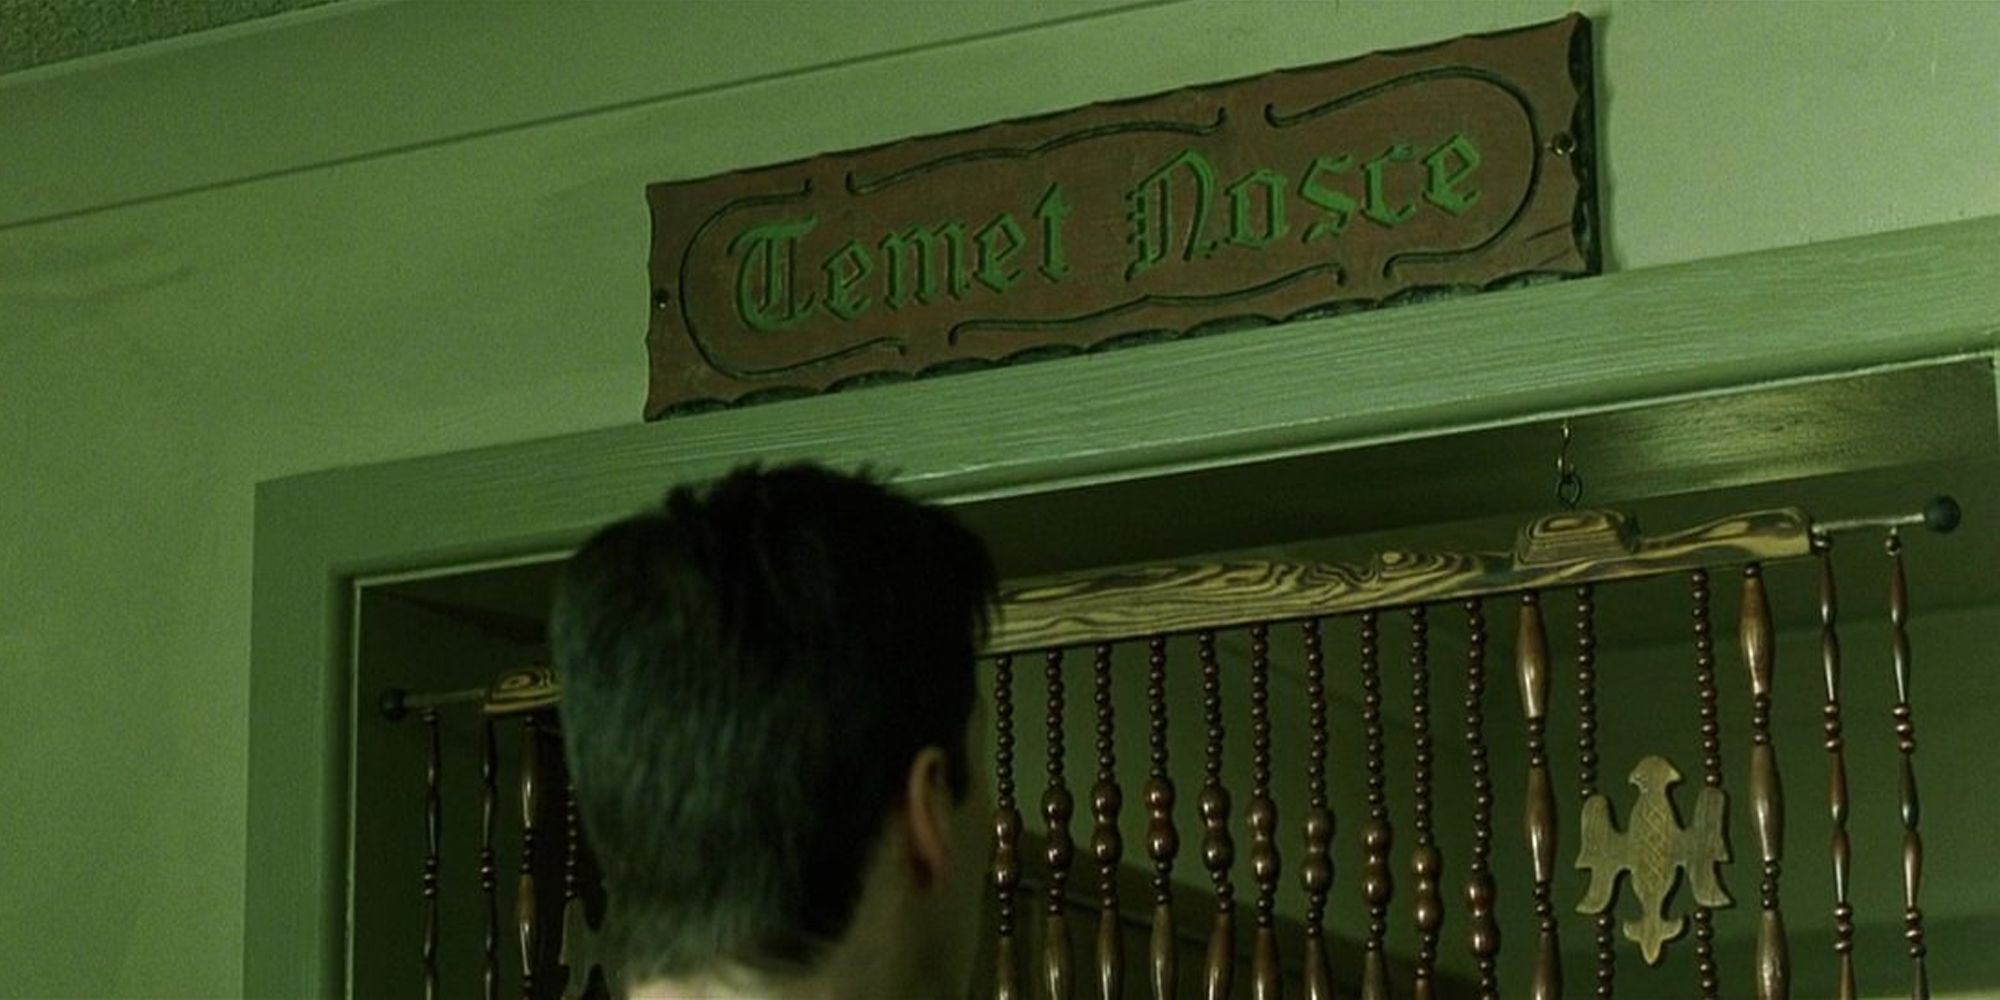 Neo looking at The Oracle's temet nosce sign.